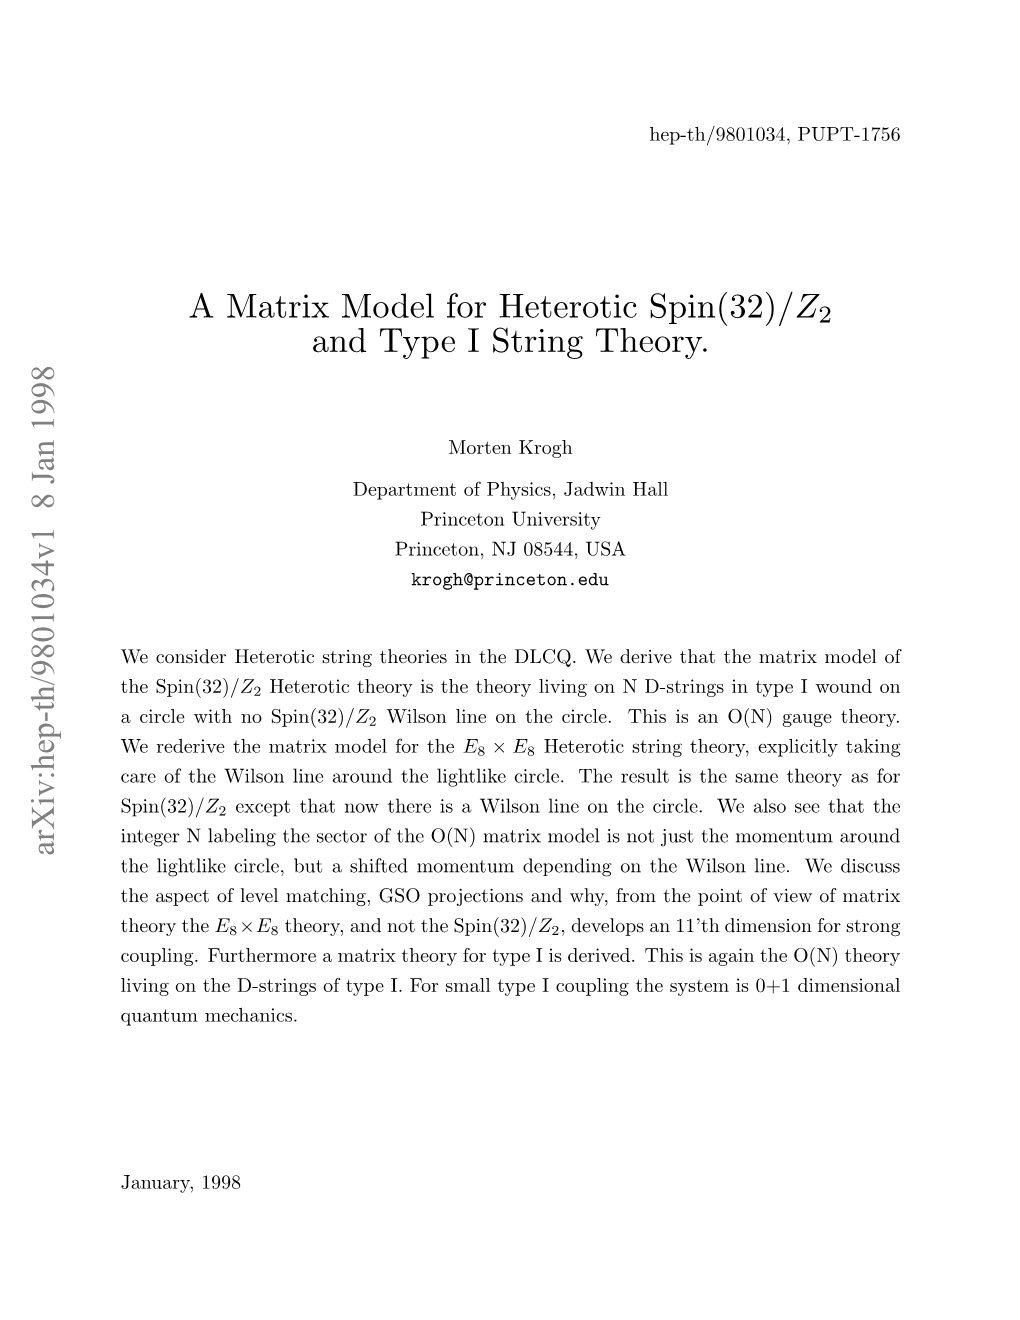 A Matrix Model for Heterotic $ Spin (32)/Z 2 $ and Type I String Theory